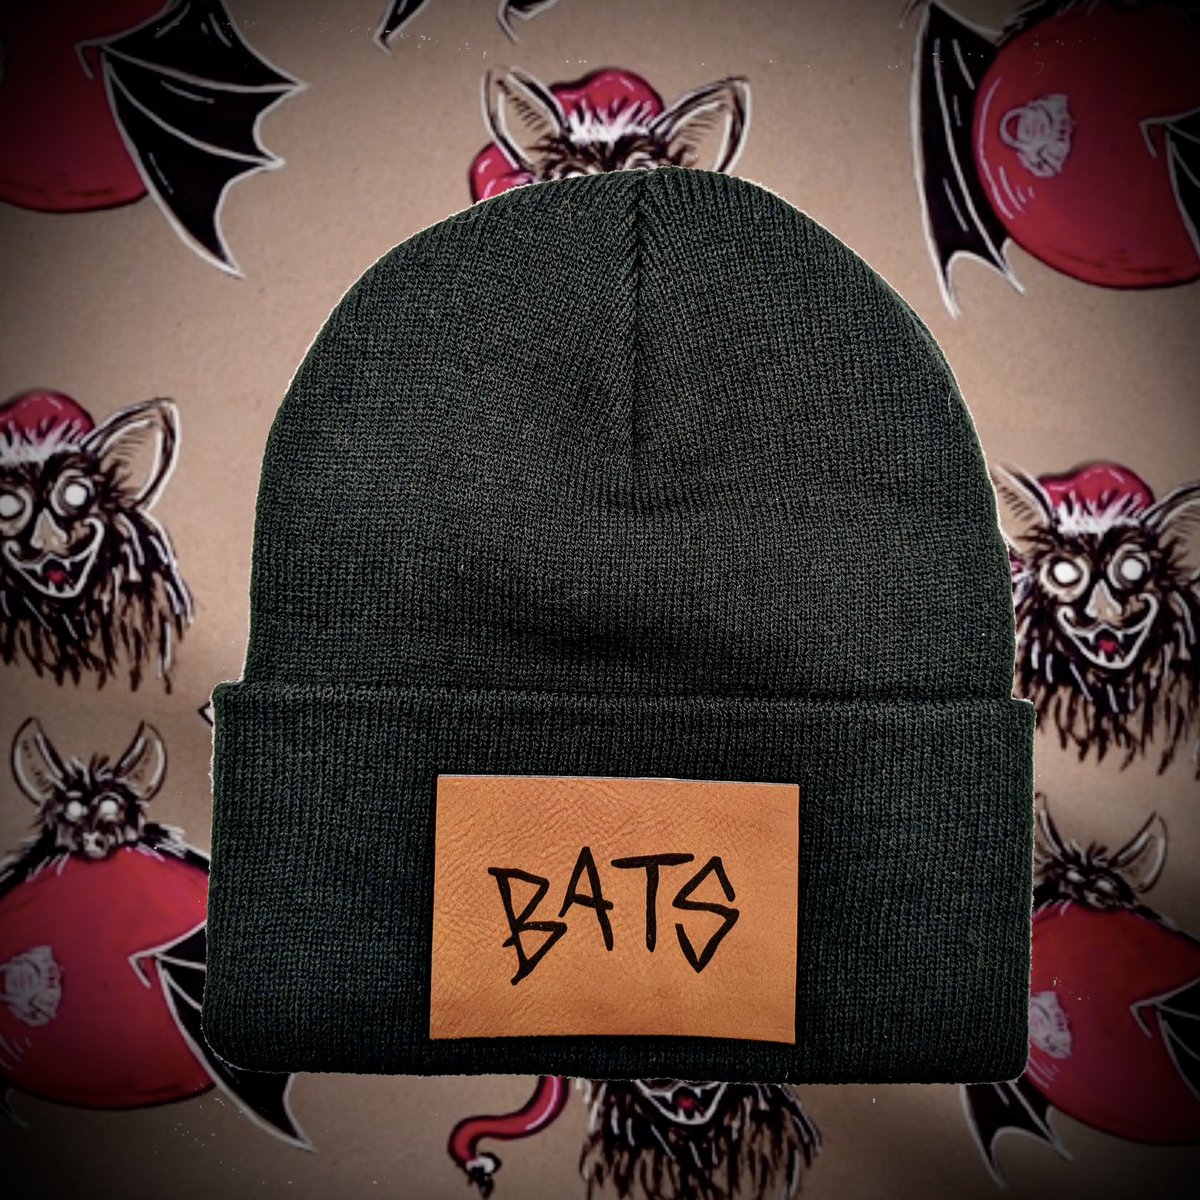 Hey MoonBats! Our favorite squirrel is giving away a “BATS” beanie. 🐿️

Fly over to our discord cave and enter now! (US shipping only)

The season of giving is here! Join our #UpsideDown community and enjoy the holiday vibes!🎁🎄🦇🩸

#MoonBats4Life @FlexMyNFT #WeAreTheUtility